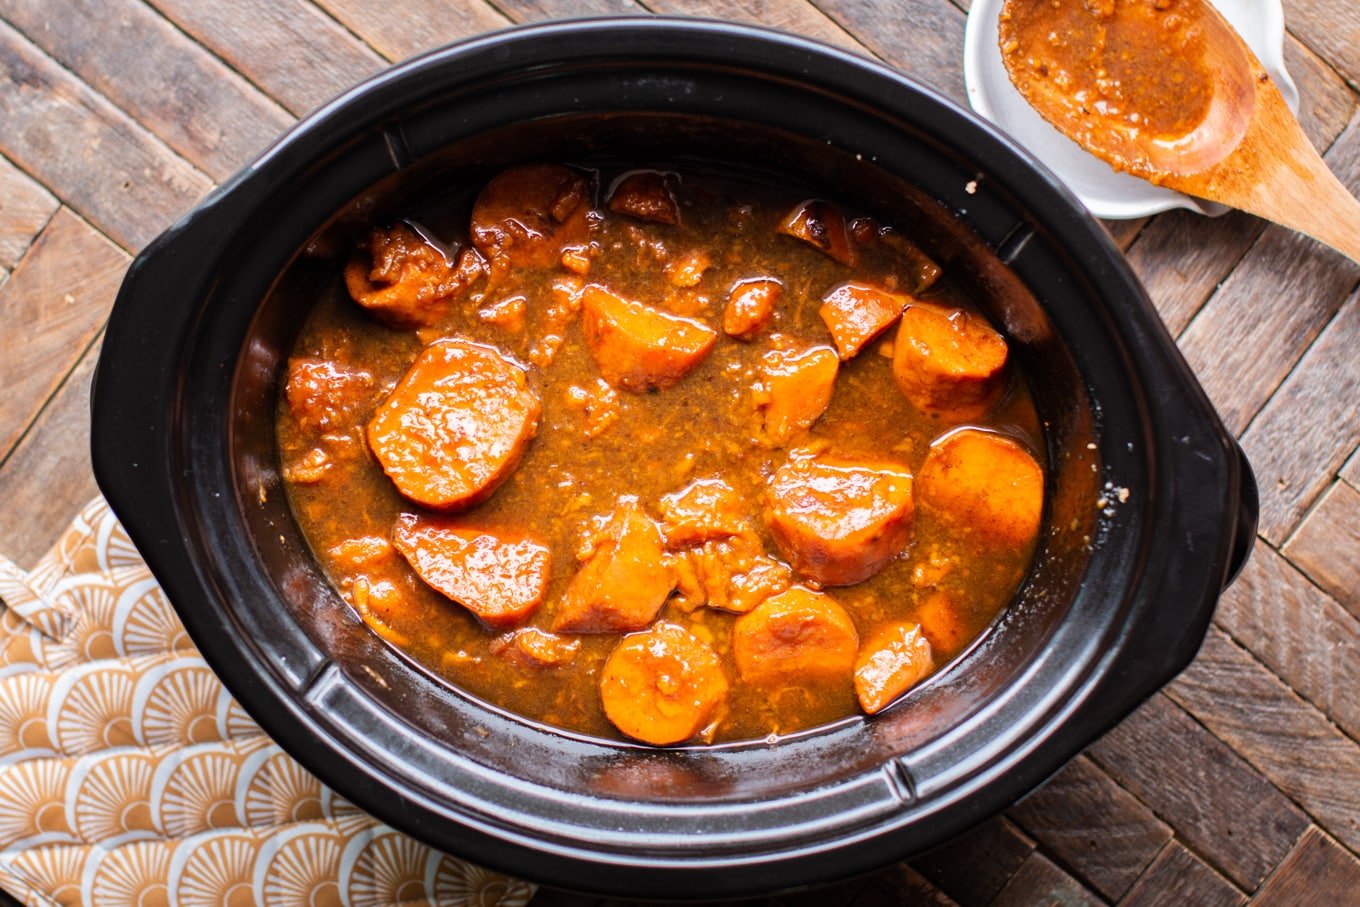 Cooked yams in rich colored sauce in the slow cooker.